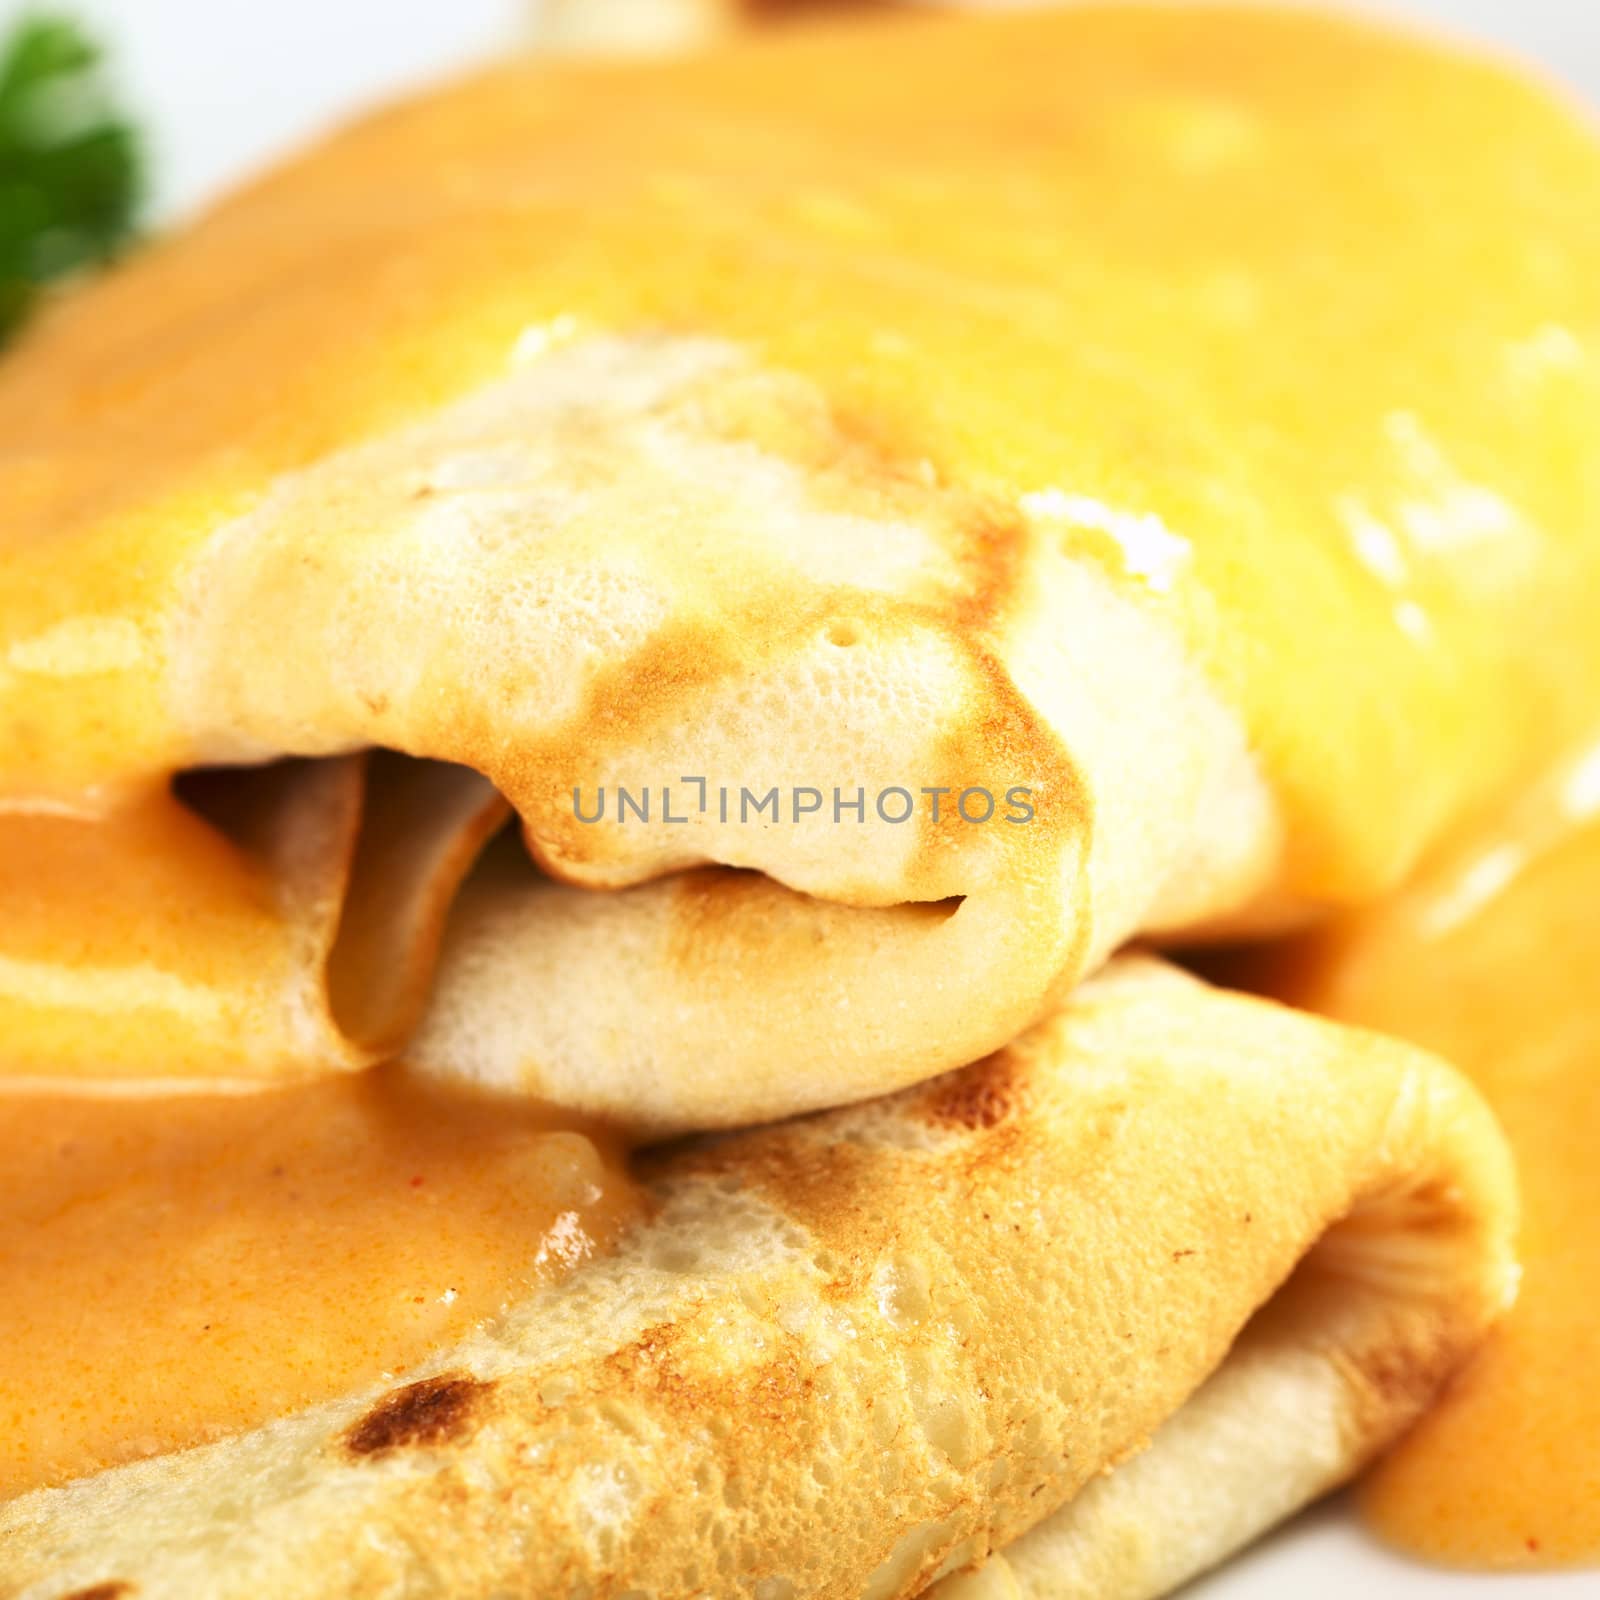 Hungarian-style crepe called Hortobagyi Husos Palacsinta (Crepe a la Hortobagy) filled with meat and served with sauce (Selective Focus, Focus on the front edge of the upper crepe)  